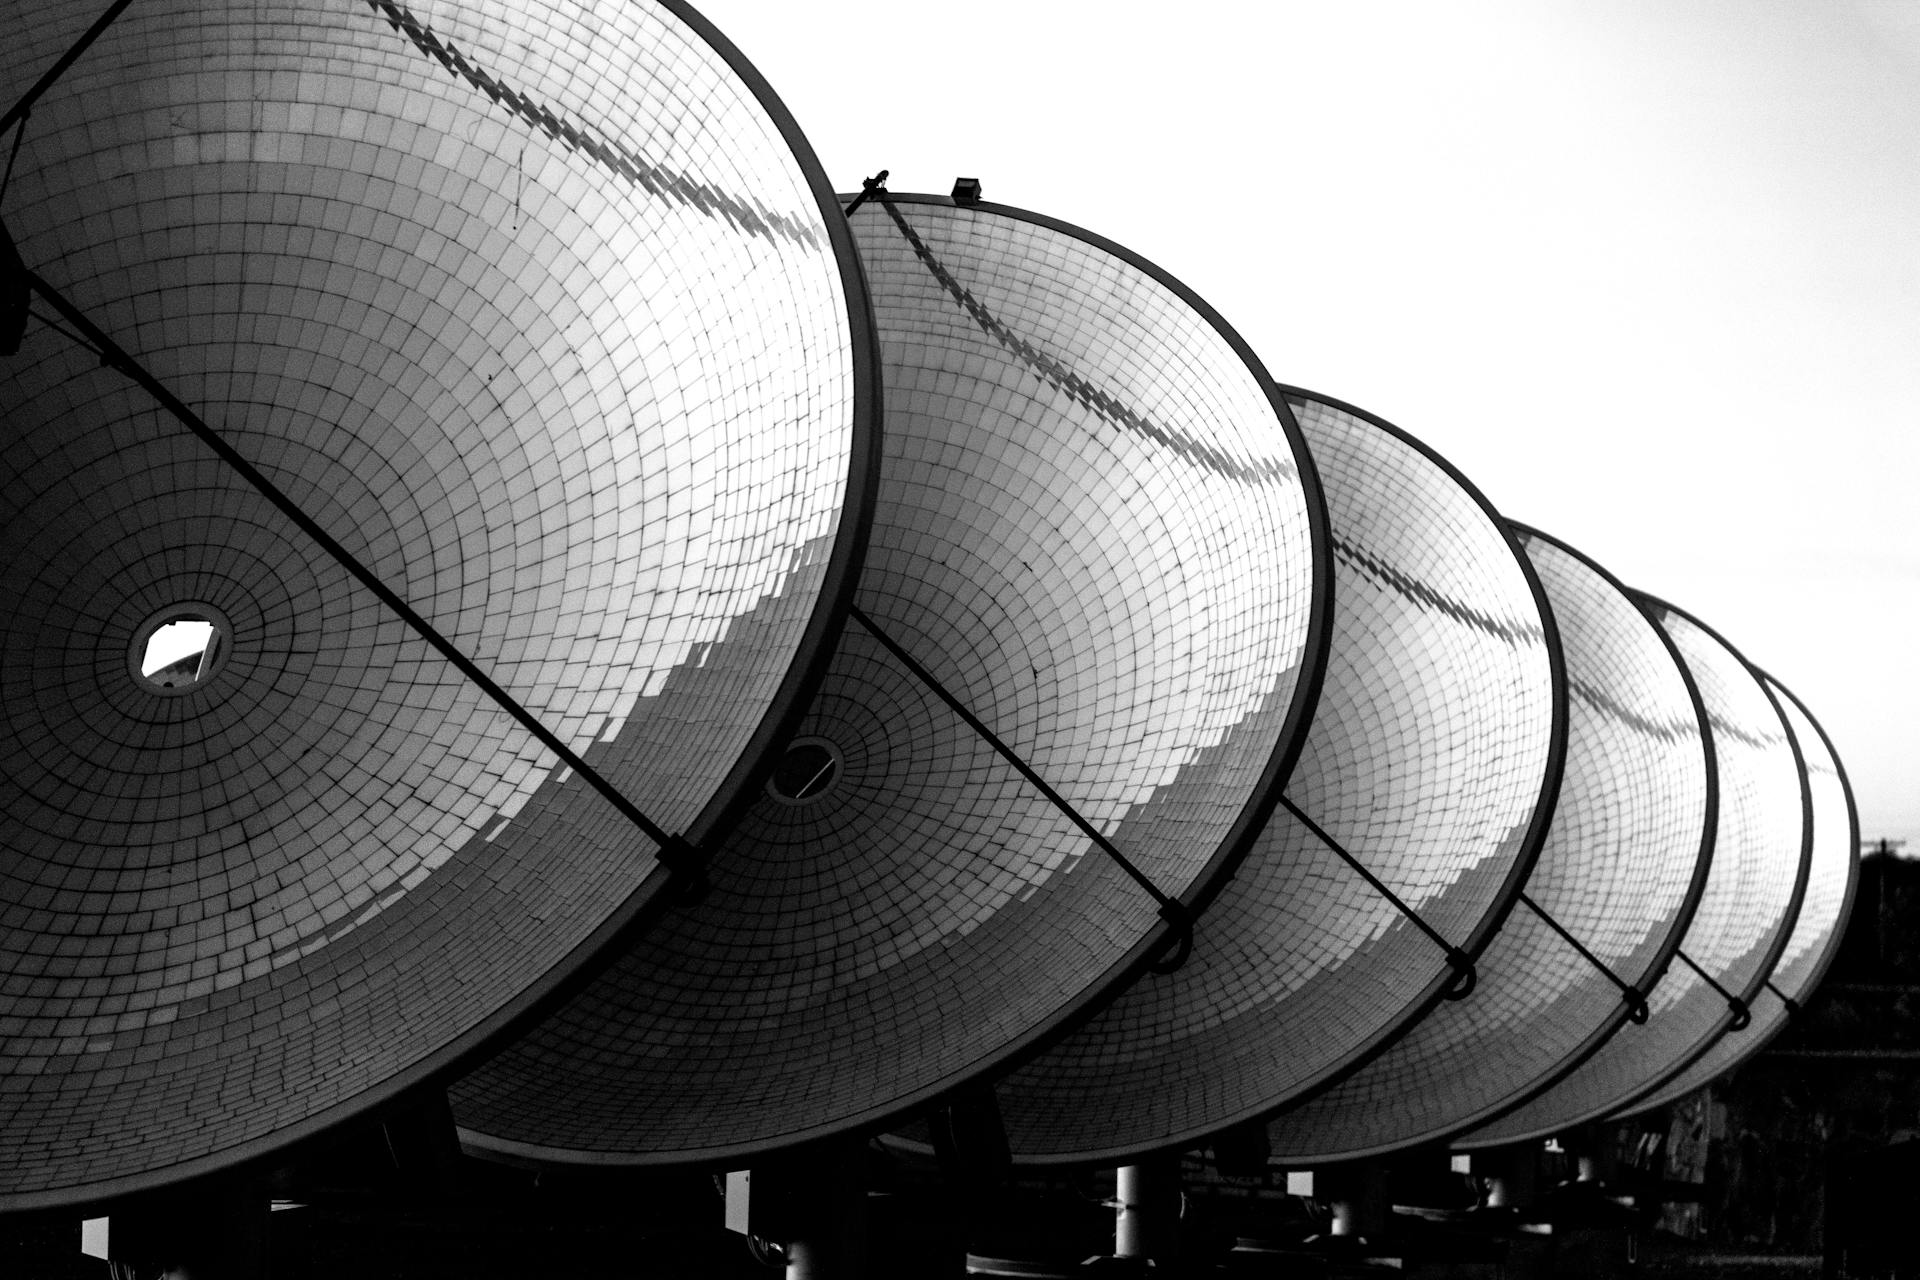 A line of six large solar dishes face towards the sun at thermal power station